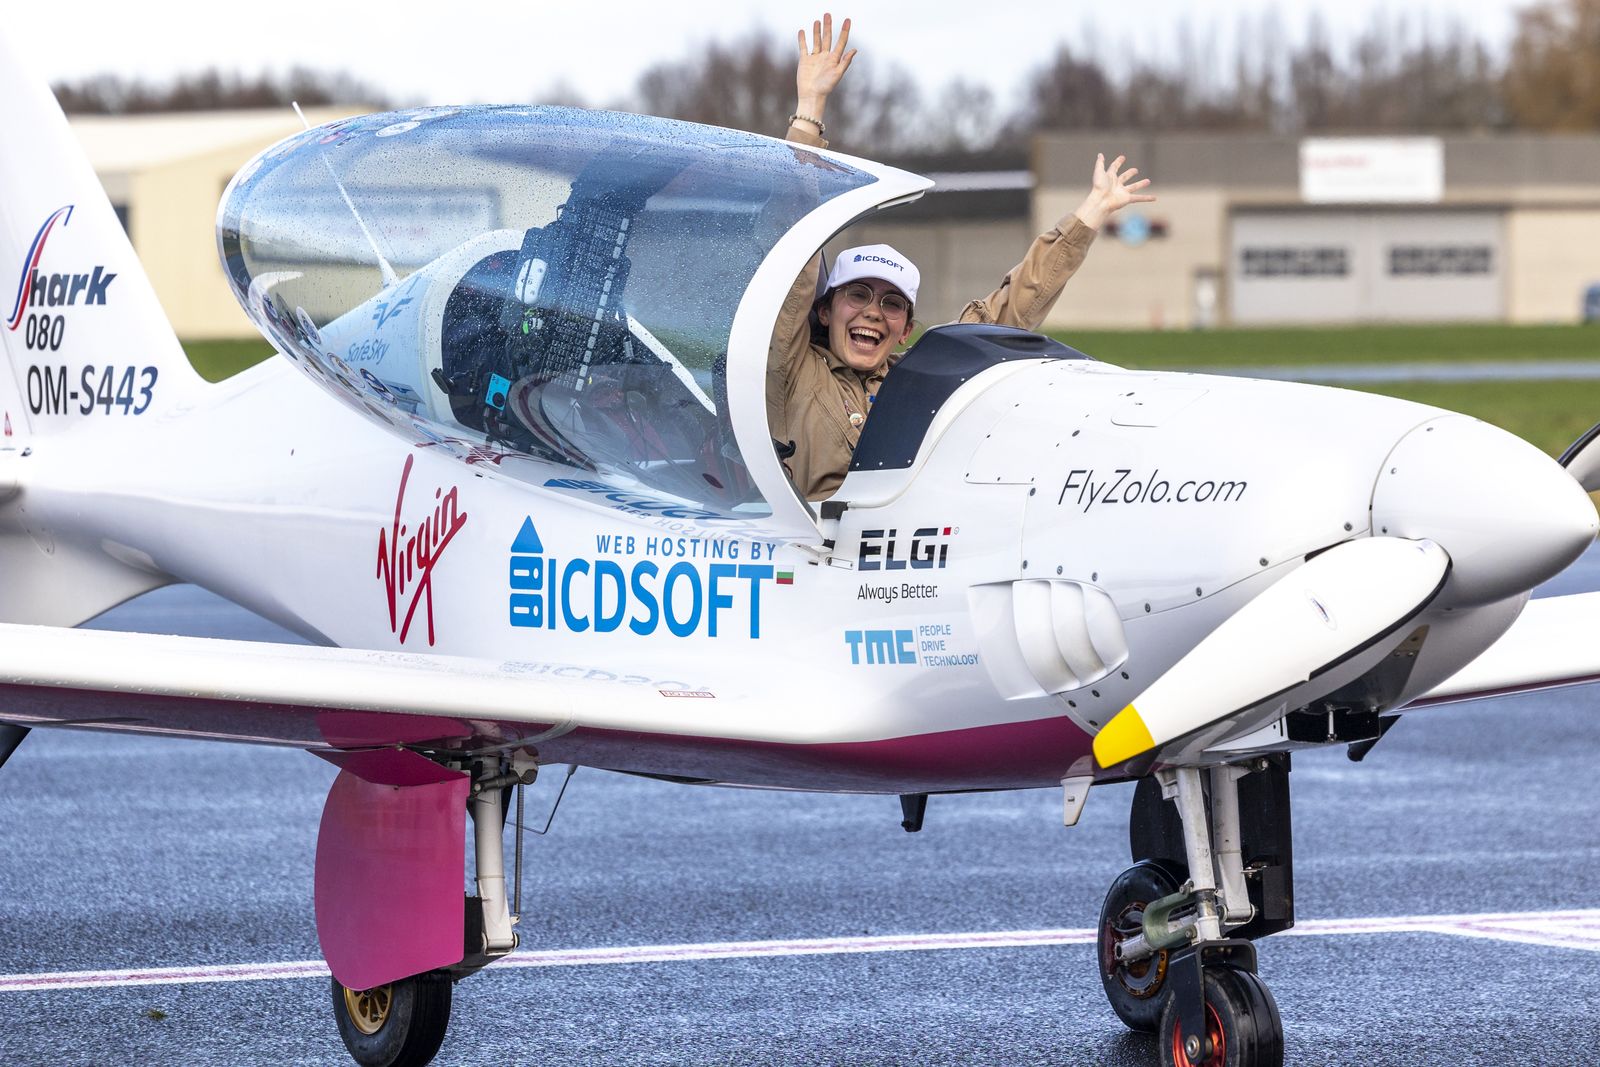 19-Year-Old Woman Completes Around-the-World Solo Flight